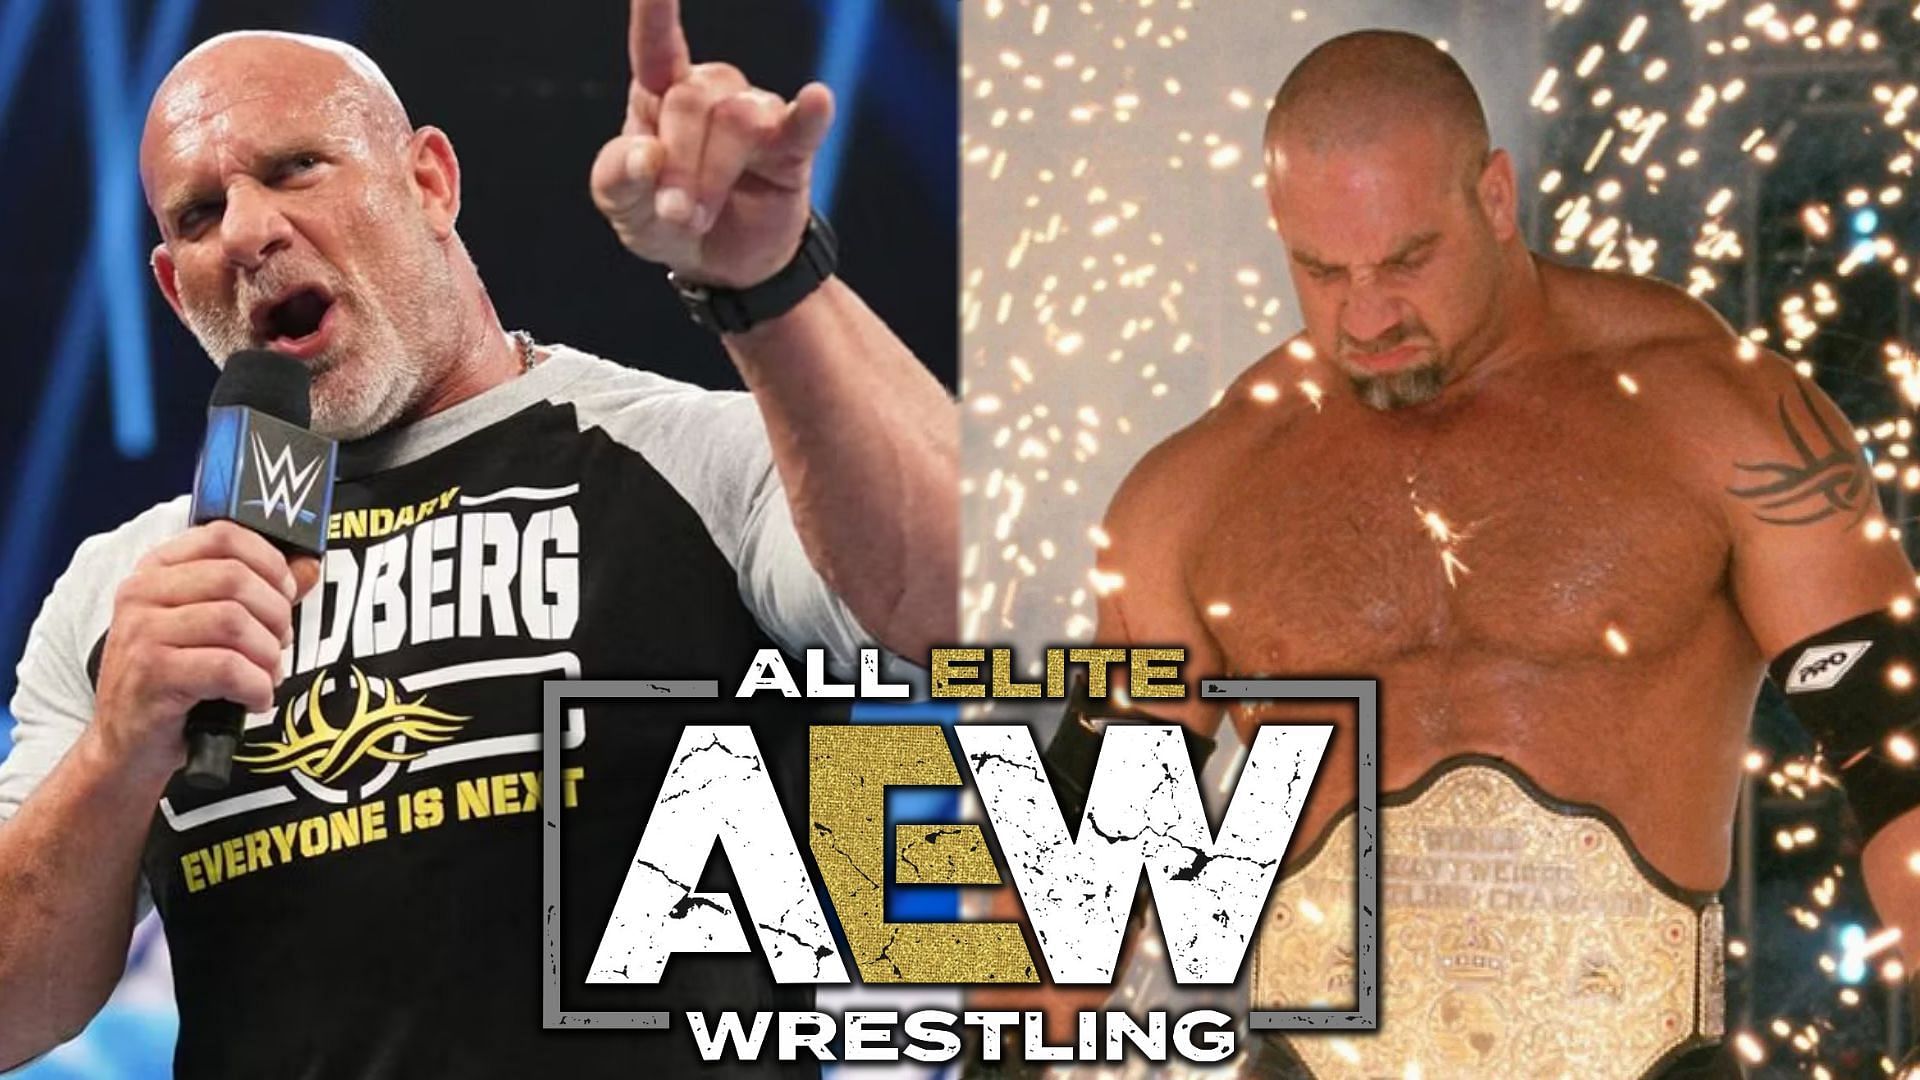 Goldberg was once one of the biggest stars in pro wrestling.